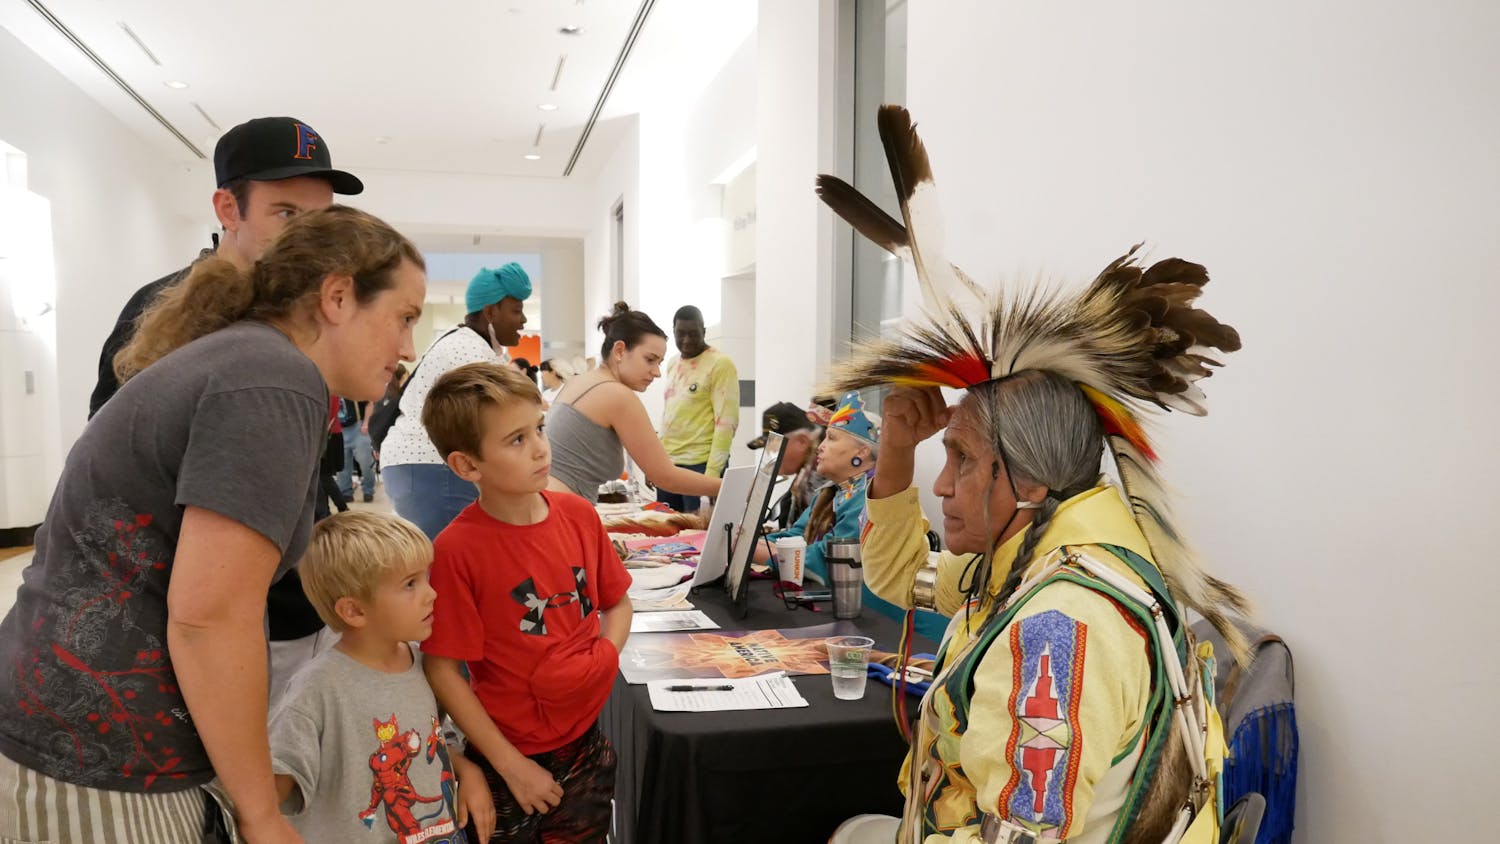 Duane Whitehorse, 76, explains the cultural significance of his garments during the Indigenous Peoples’ Week celebration at the Harn Museum of Art on Oct. 12, 2023.